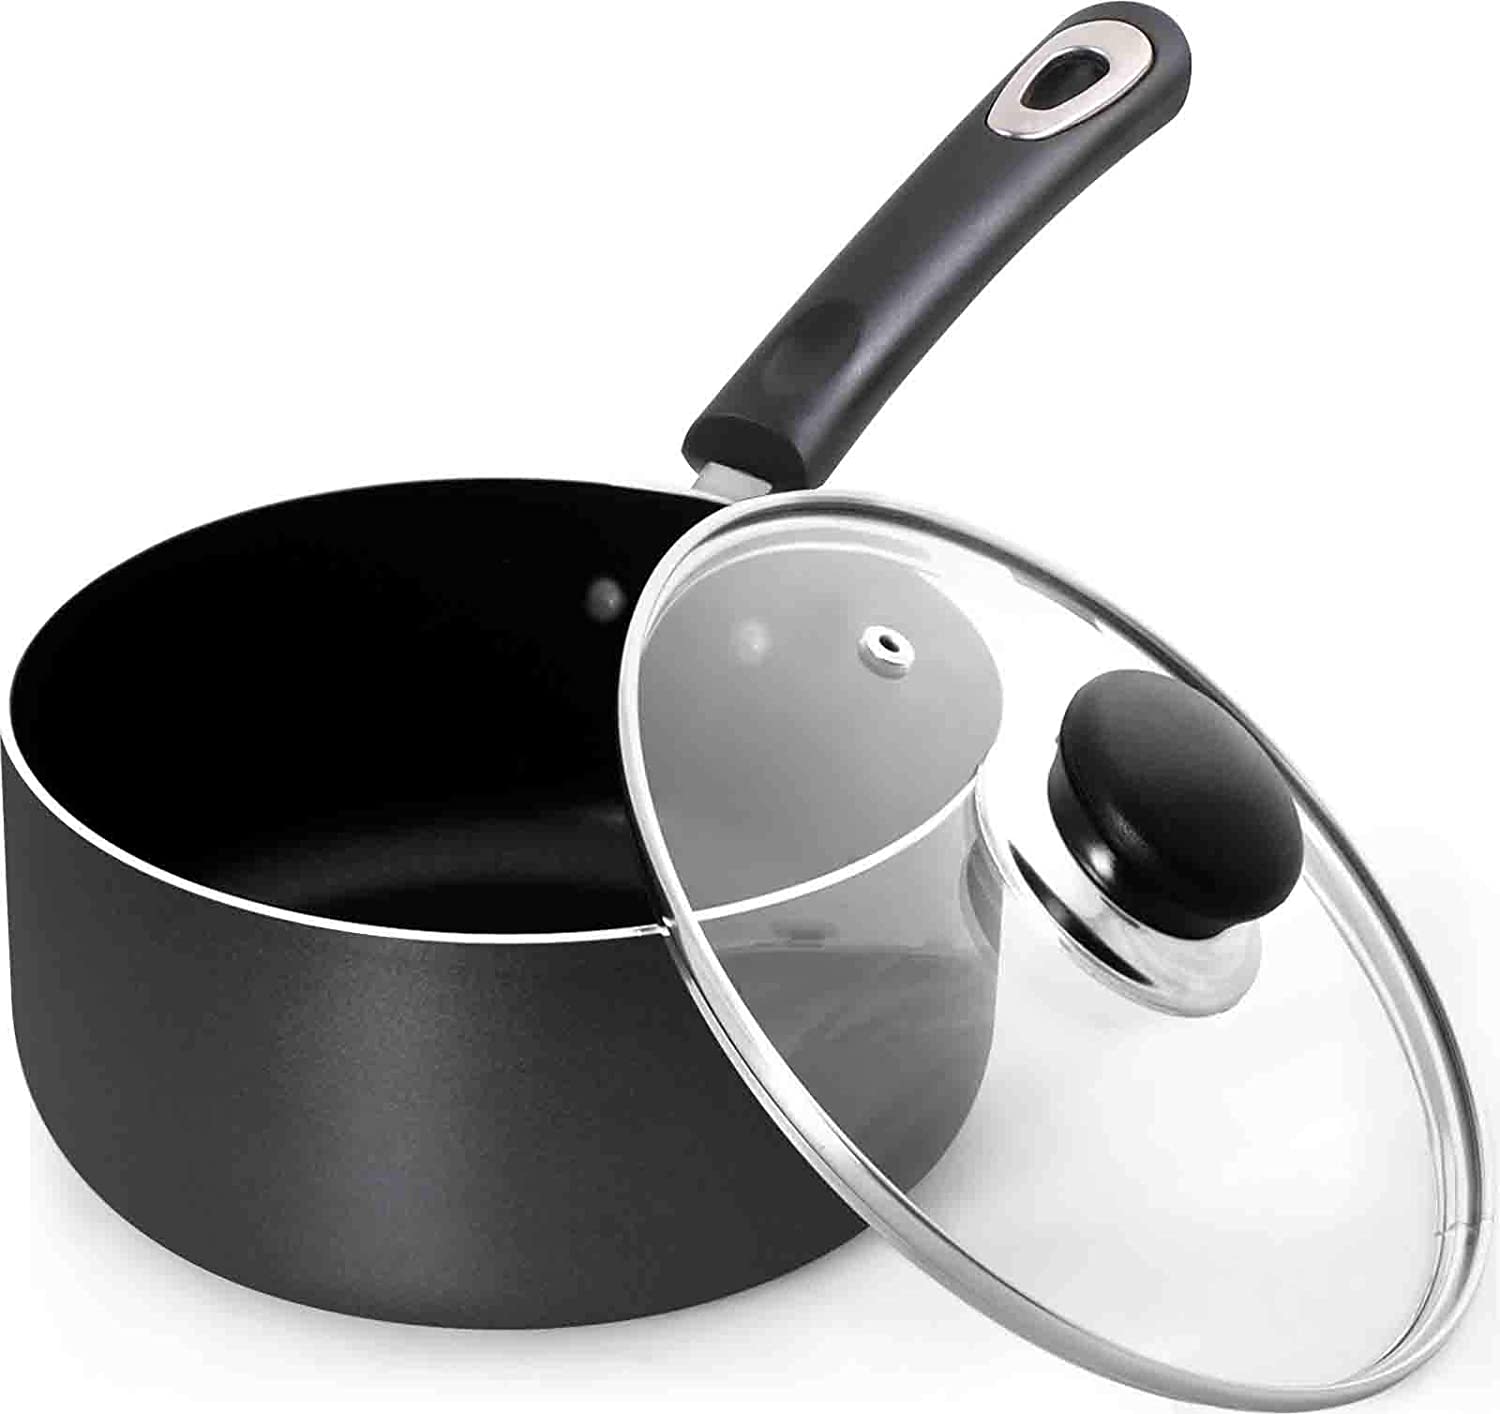 Restaurant 6 qt. Aluminum Nonstick Saute Pan in Silver with Glass Lid